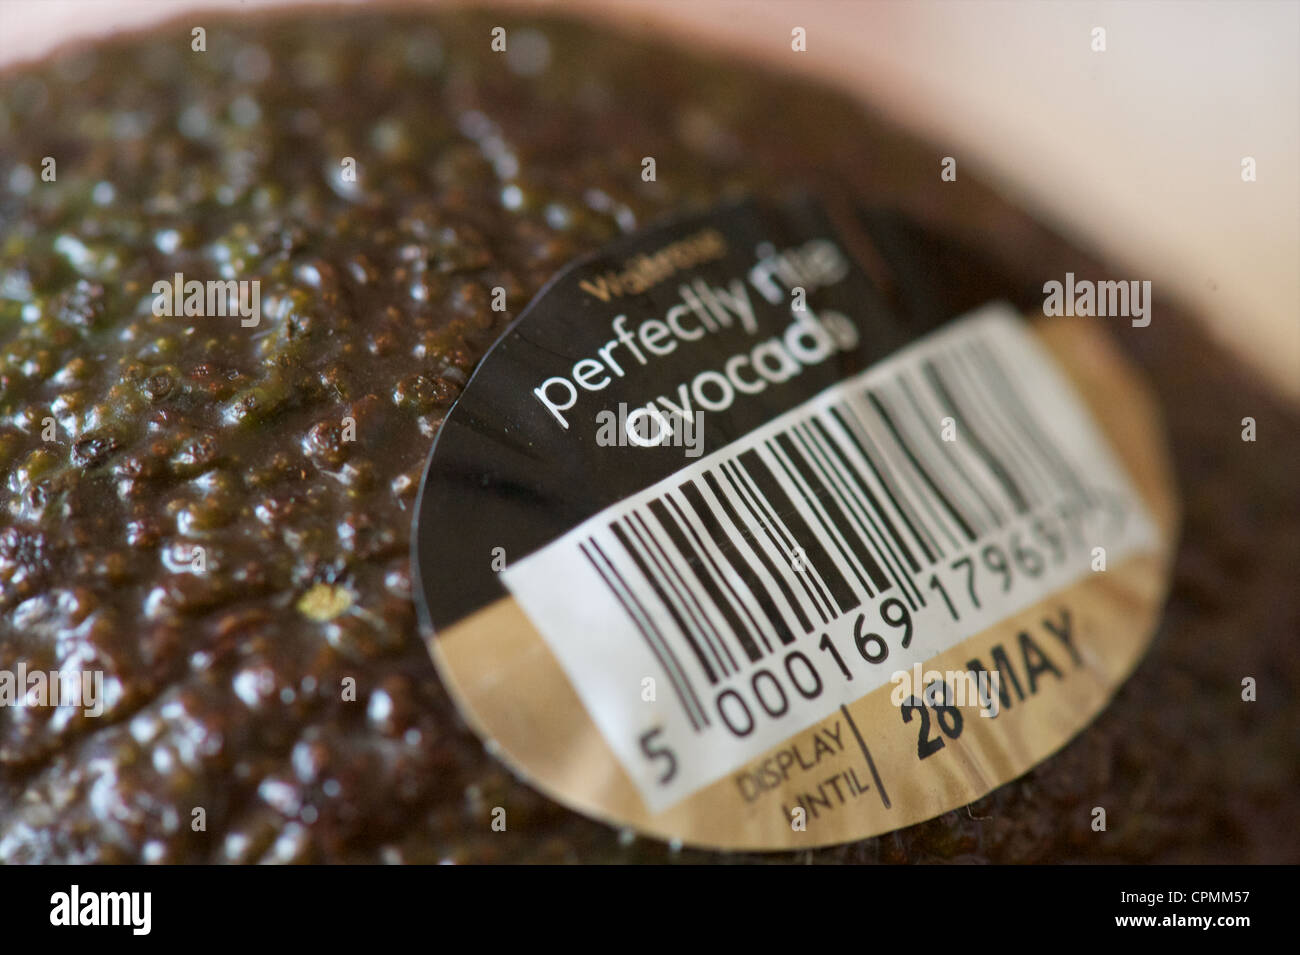 detail of a Waitrose labeled Perfectly Ripe Avocado Stock Photo